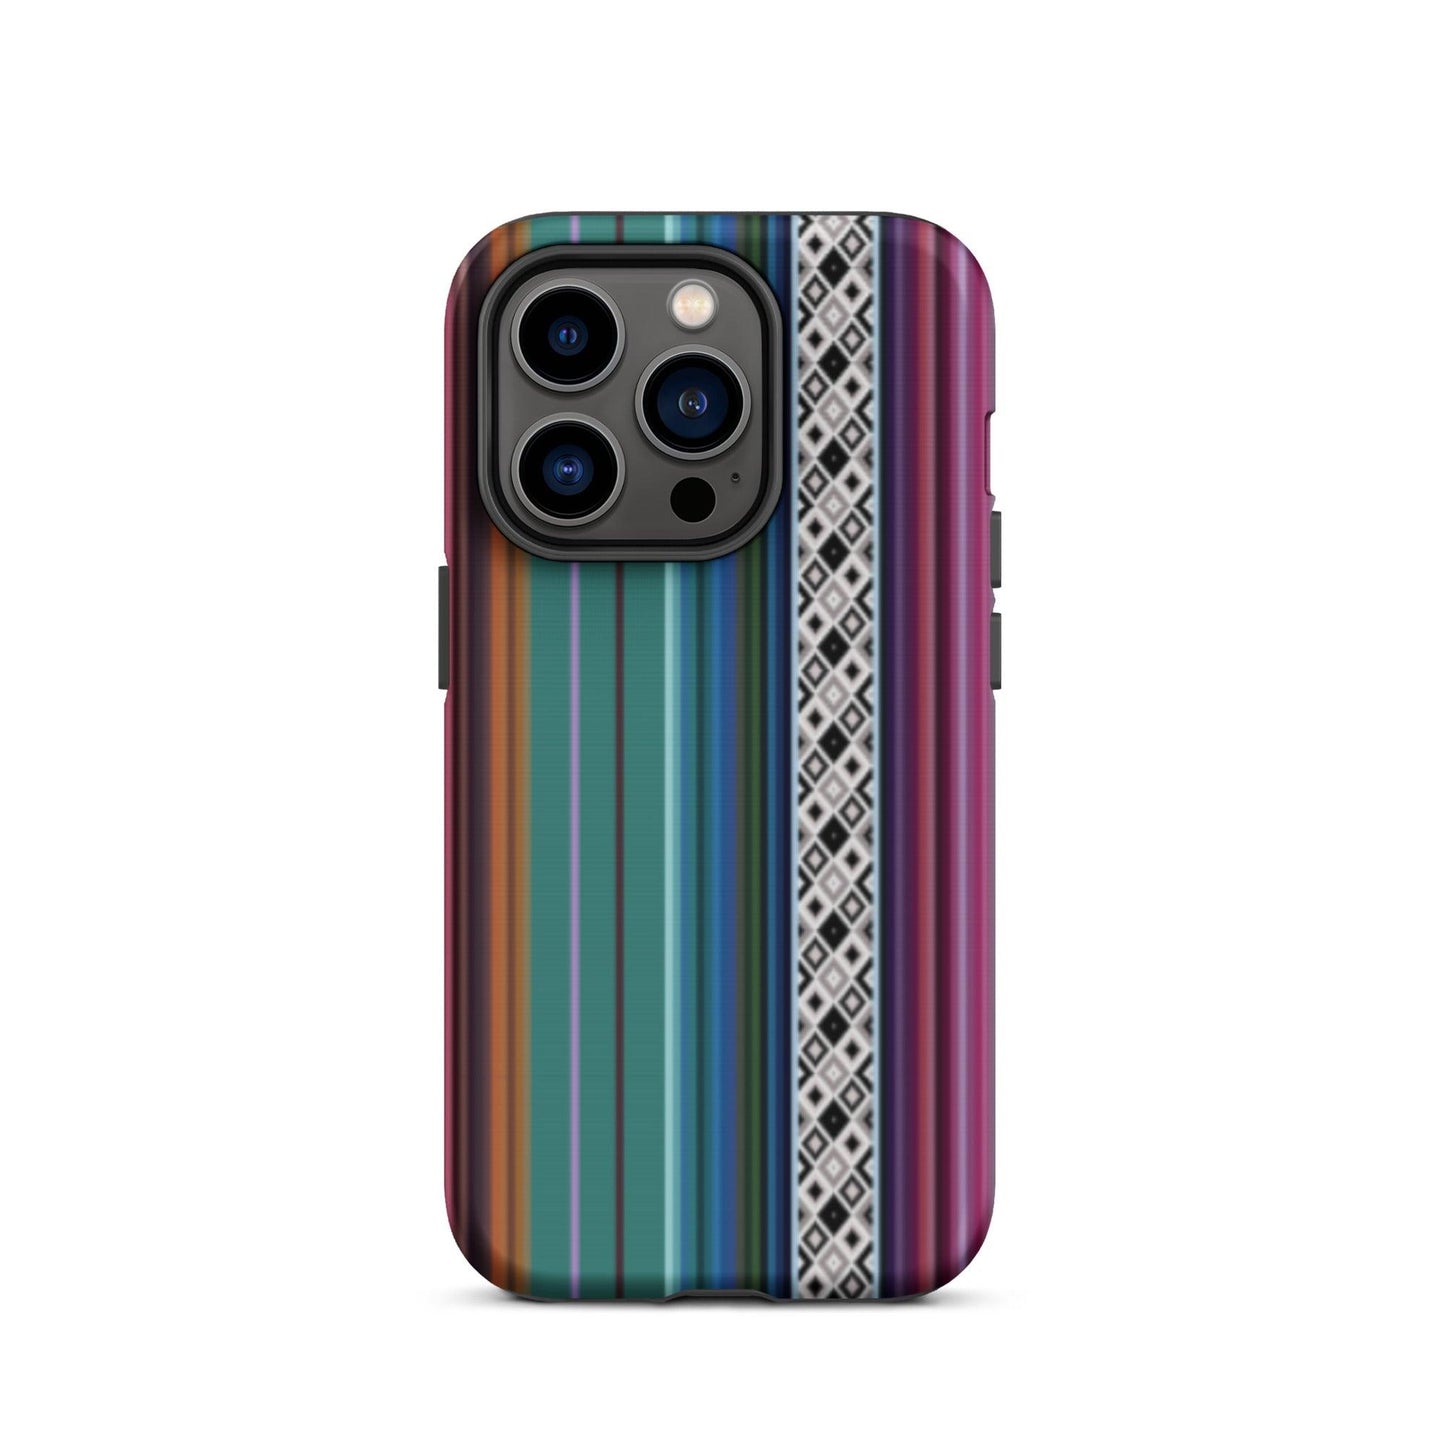 Mexican Aztec Tough iPhone case - The Global Wanderer